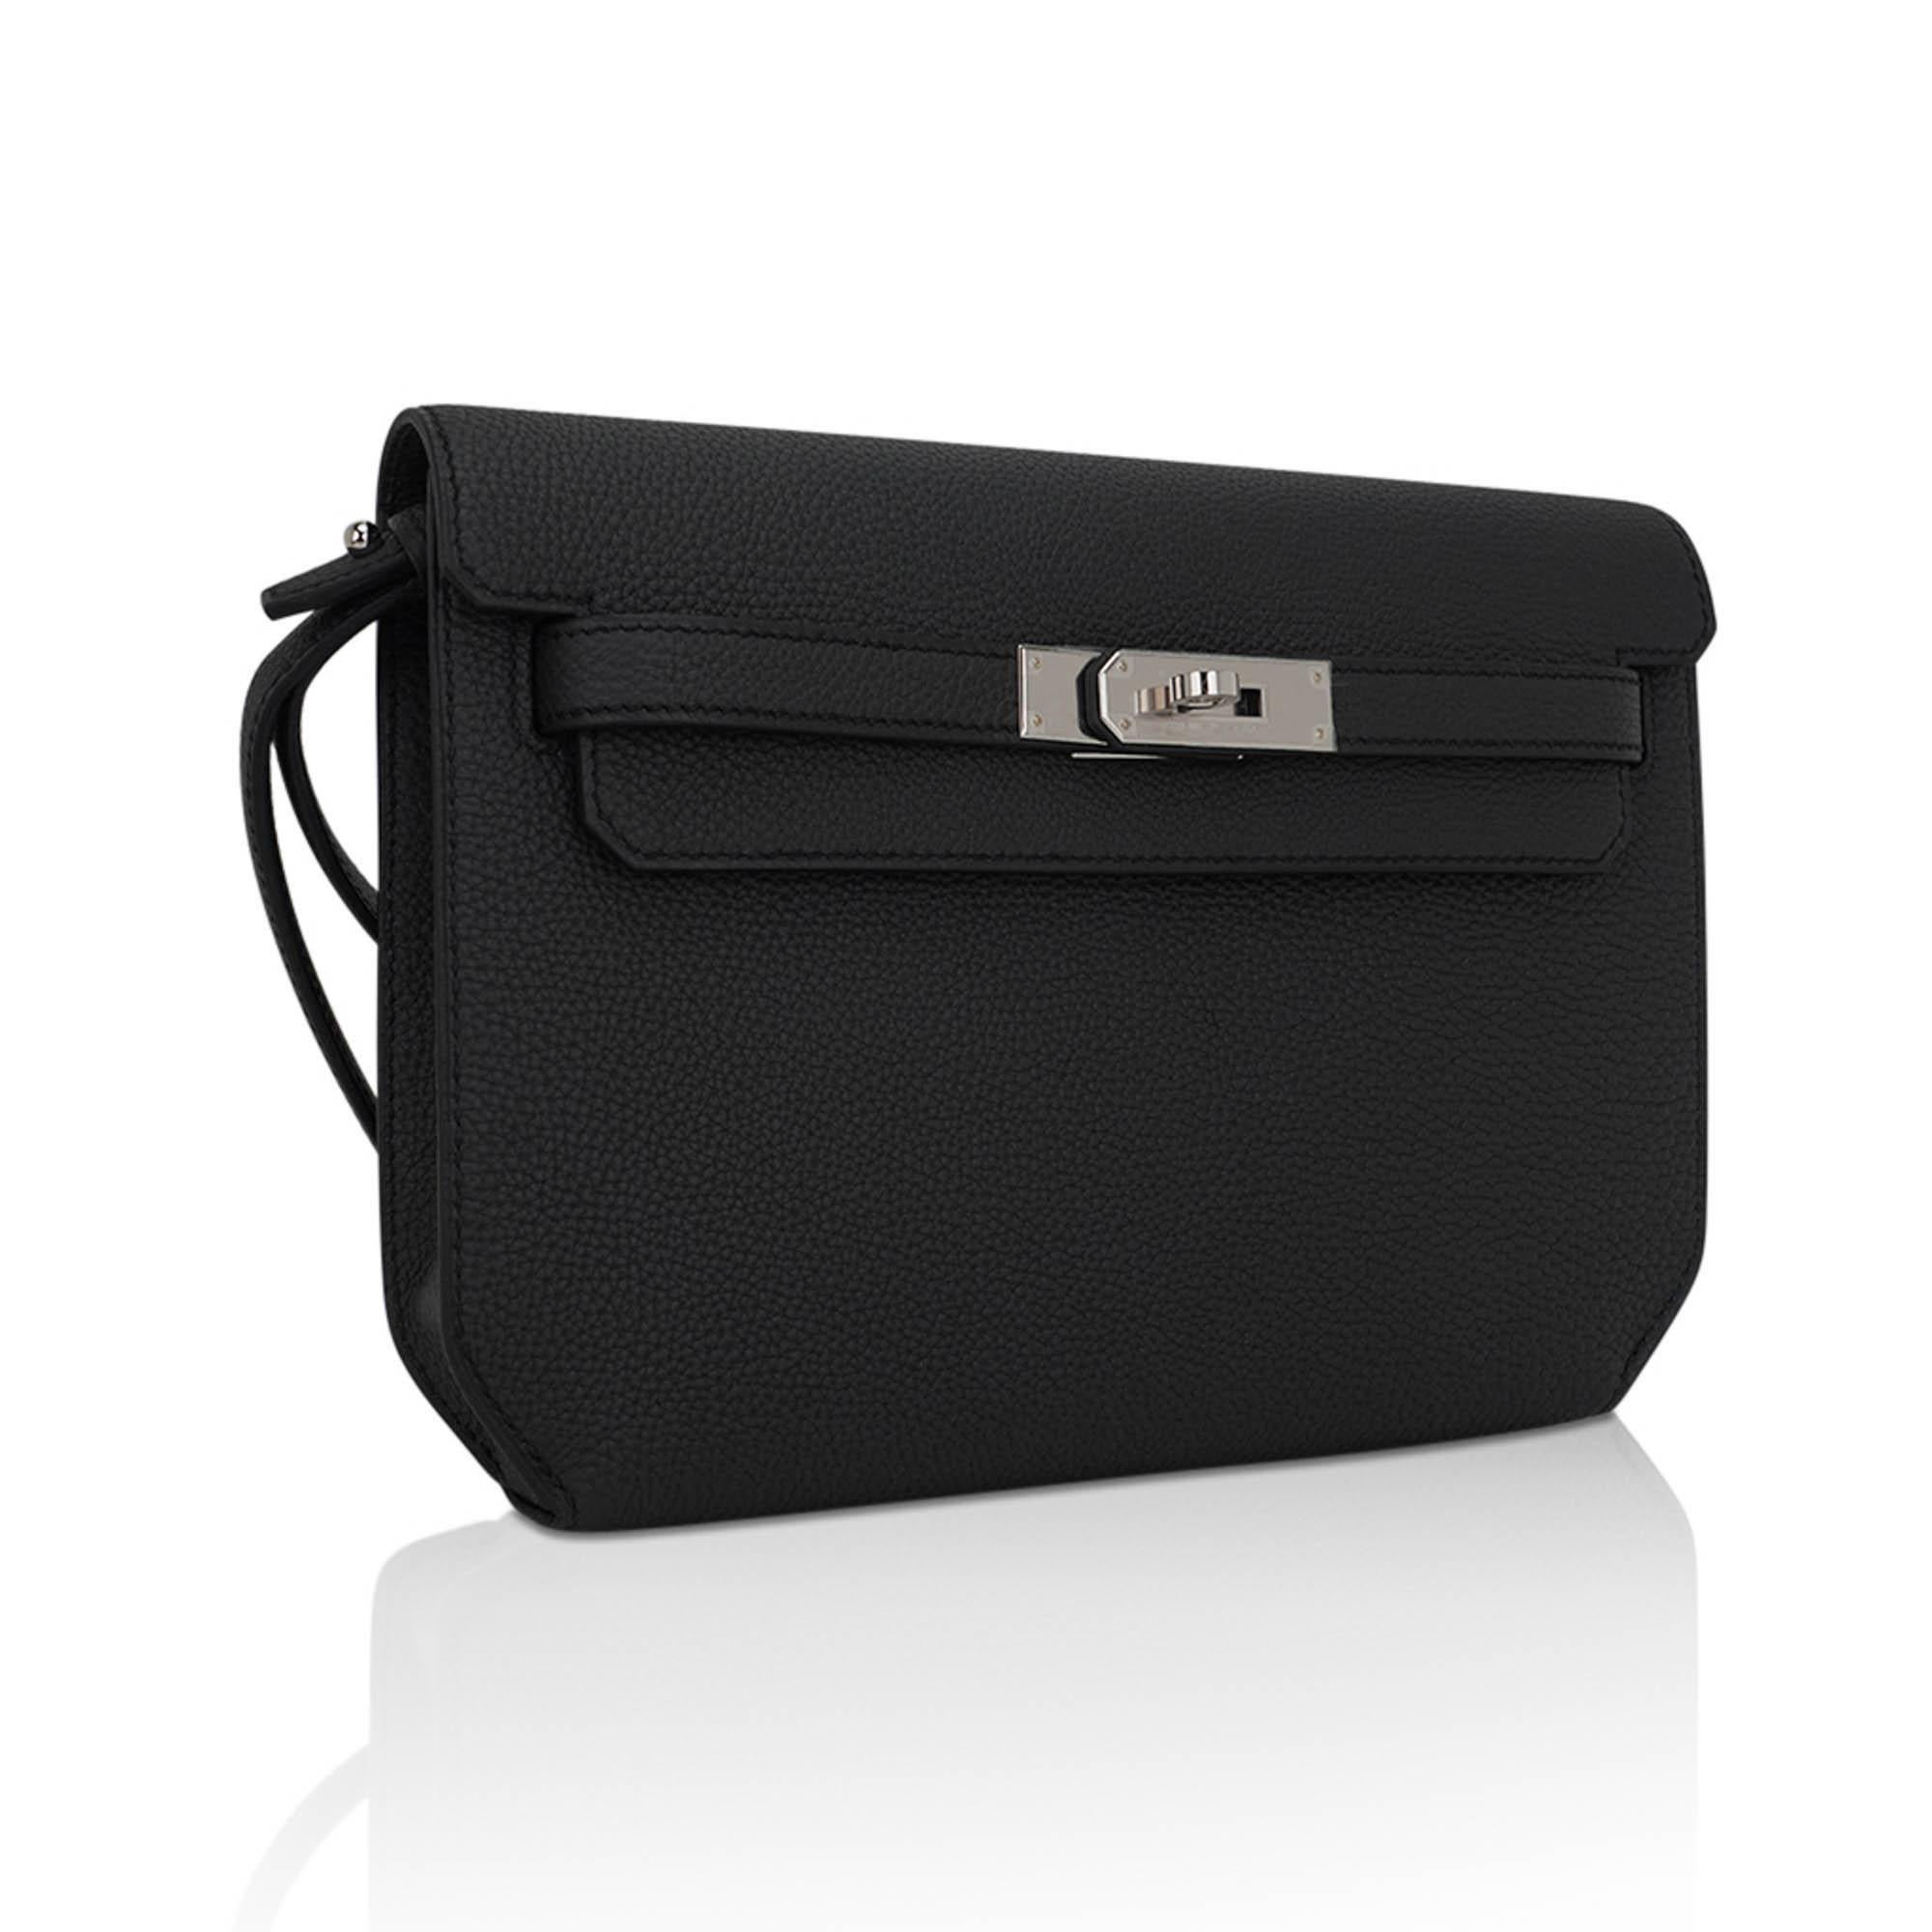 Mightychic offers an Hermes Kelly Depeches 25 Pouch featured in Black very rare Galop D'Hermes Vache leather.
Timeless with a flat grain, this leather has a rich matte finish.
This exquisite neutral bag is perfect for year round wear.
Crisp with